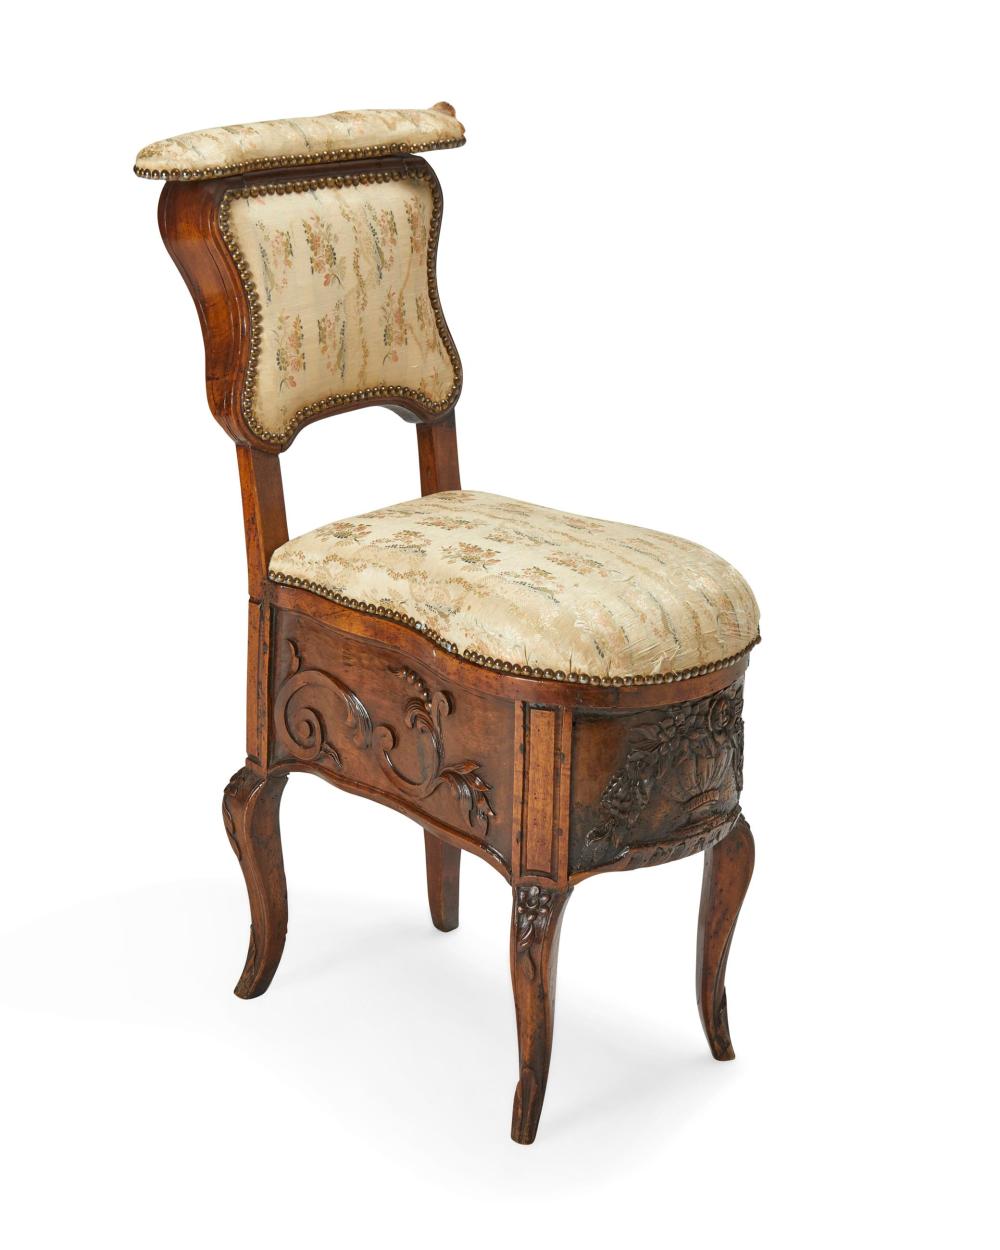 A FRENCH CARVED WOOD COMMODE CHAIRA 2daccb